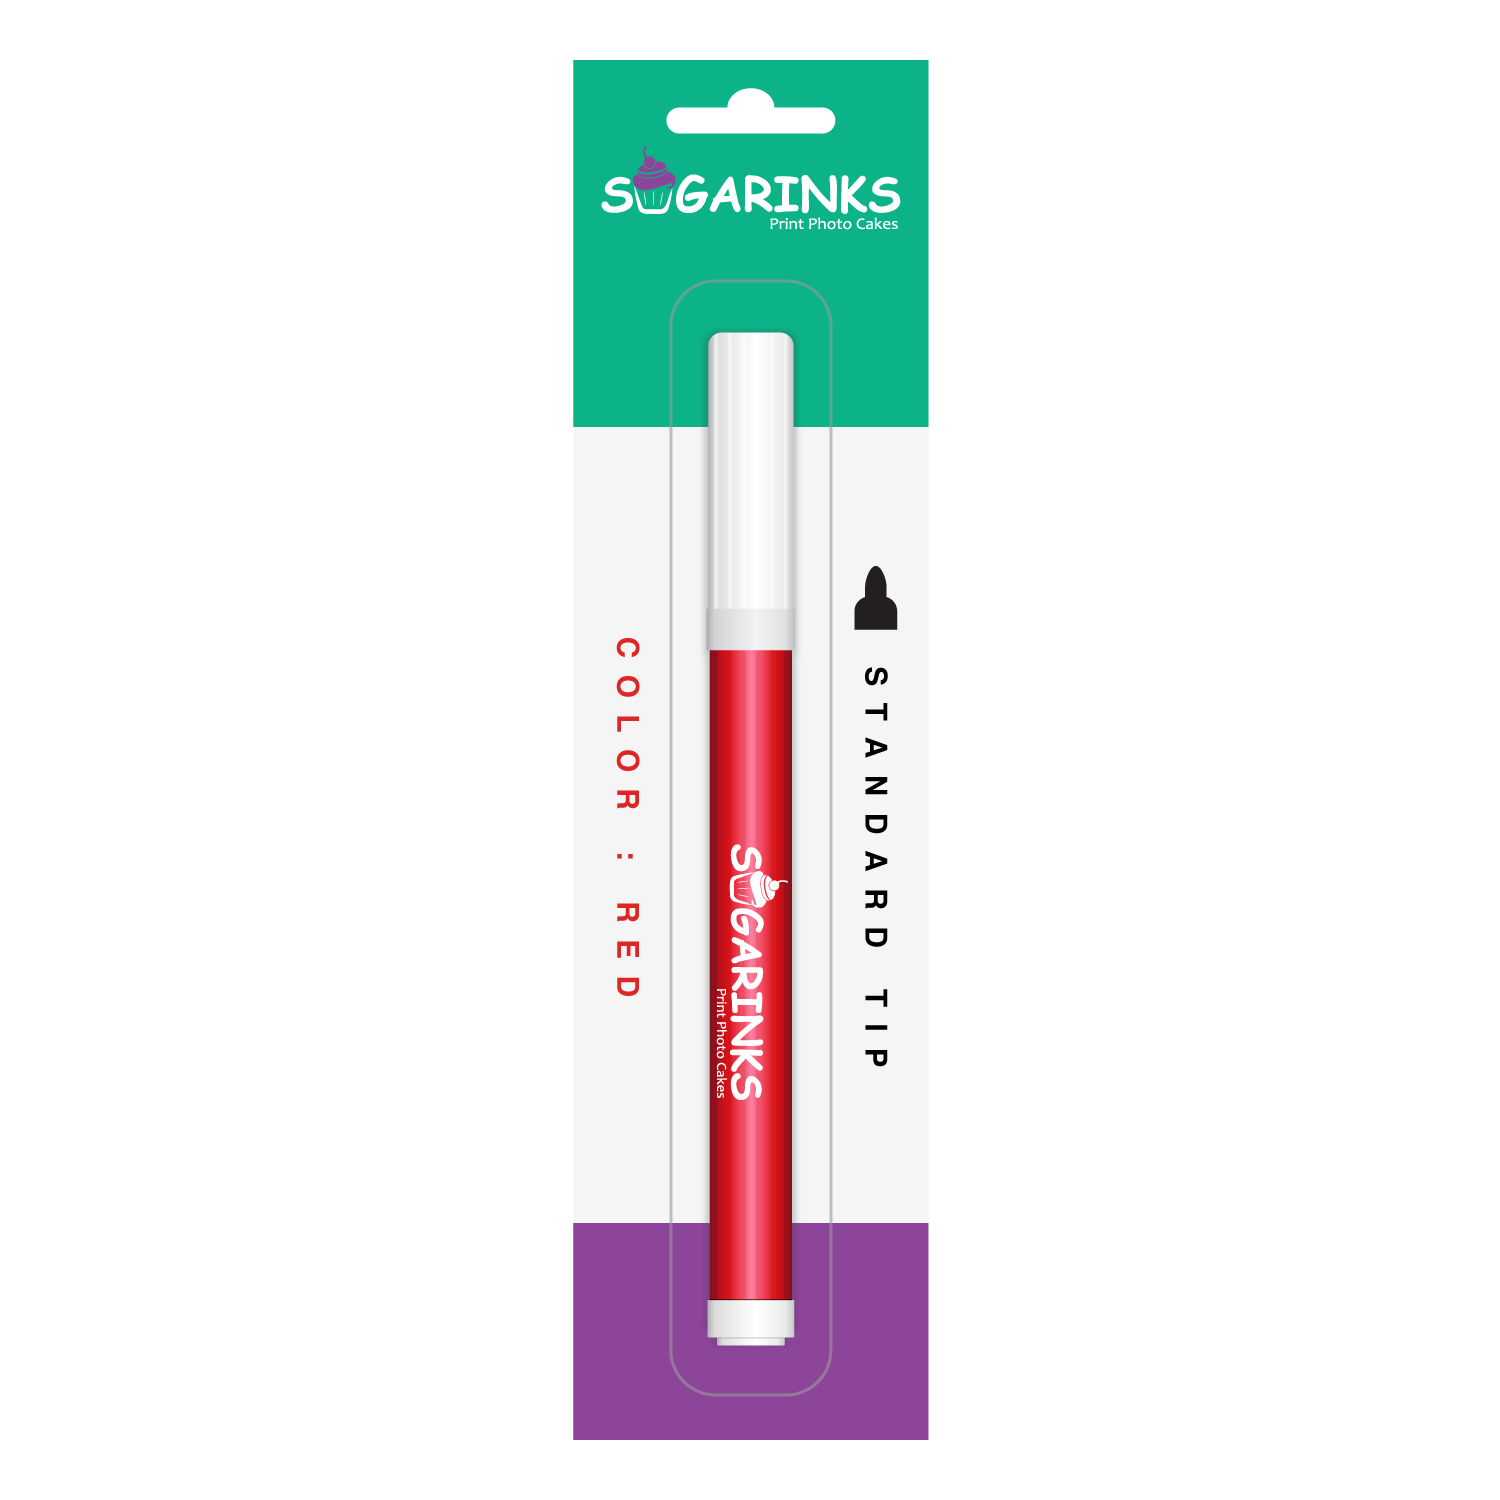 Sugarinks Edible Ink Pen Standard Tip for Cake, Cookie, and Cupcake Edible Art - Red